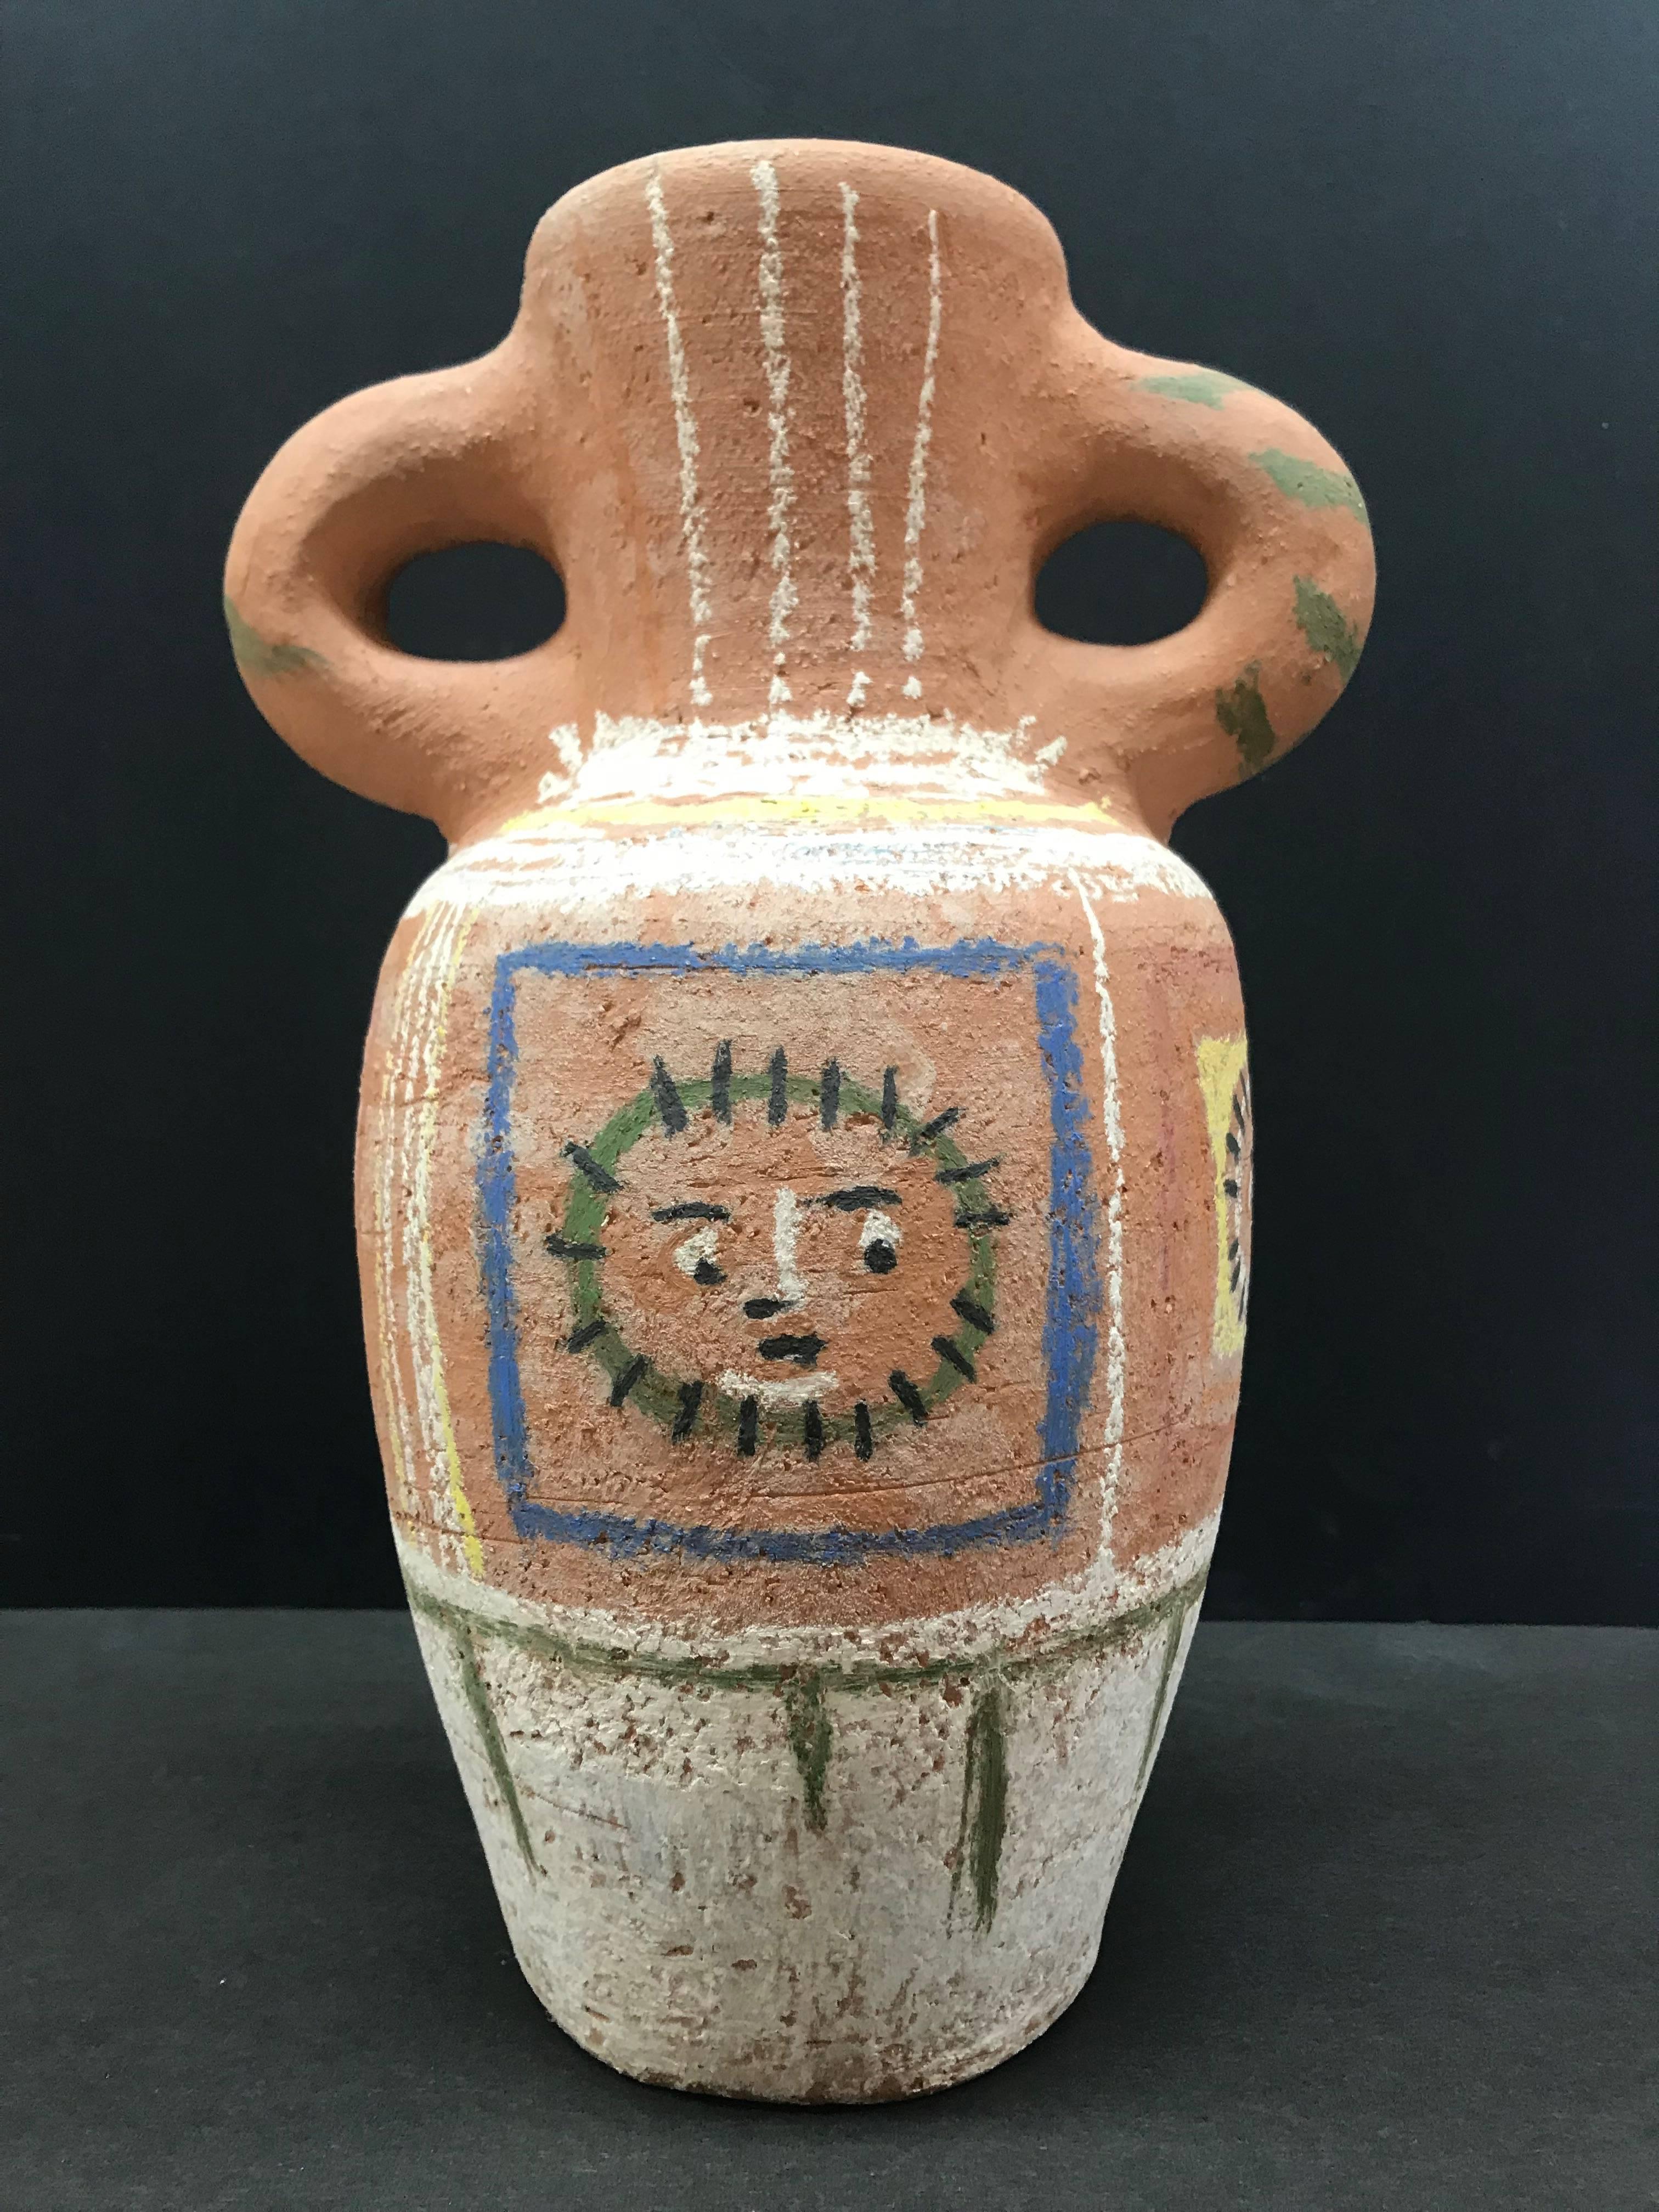 This piece is a turned vase by Pablo Picasso, created in 1953. It is made with chamotted red eathenware clay, decoration in pastels using white, green, yellow, blue and black. This piece is numbered 55/200 from the edition of 200 and bears the